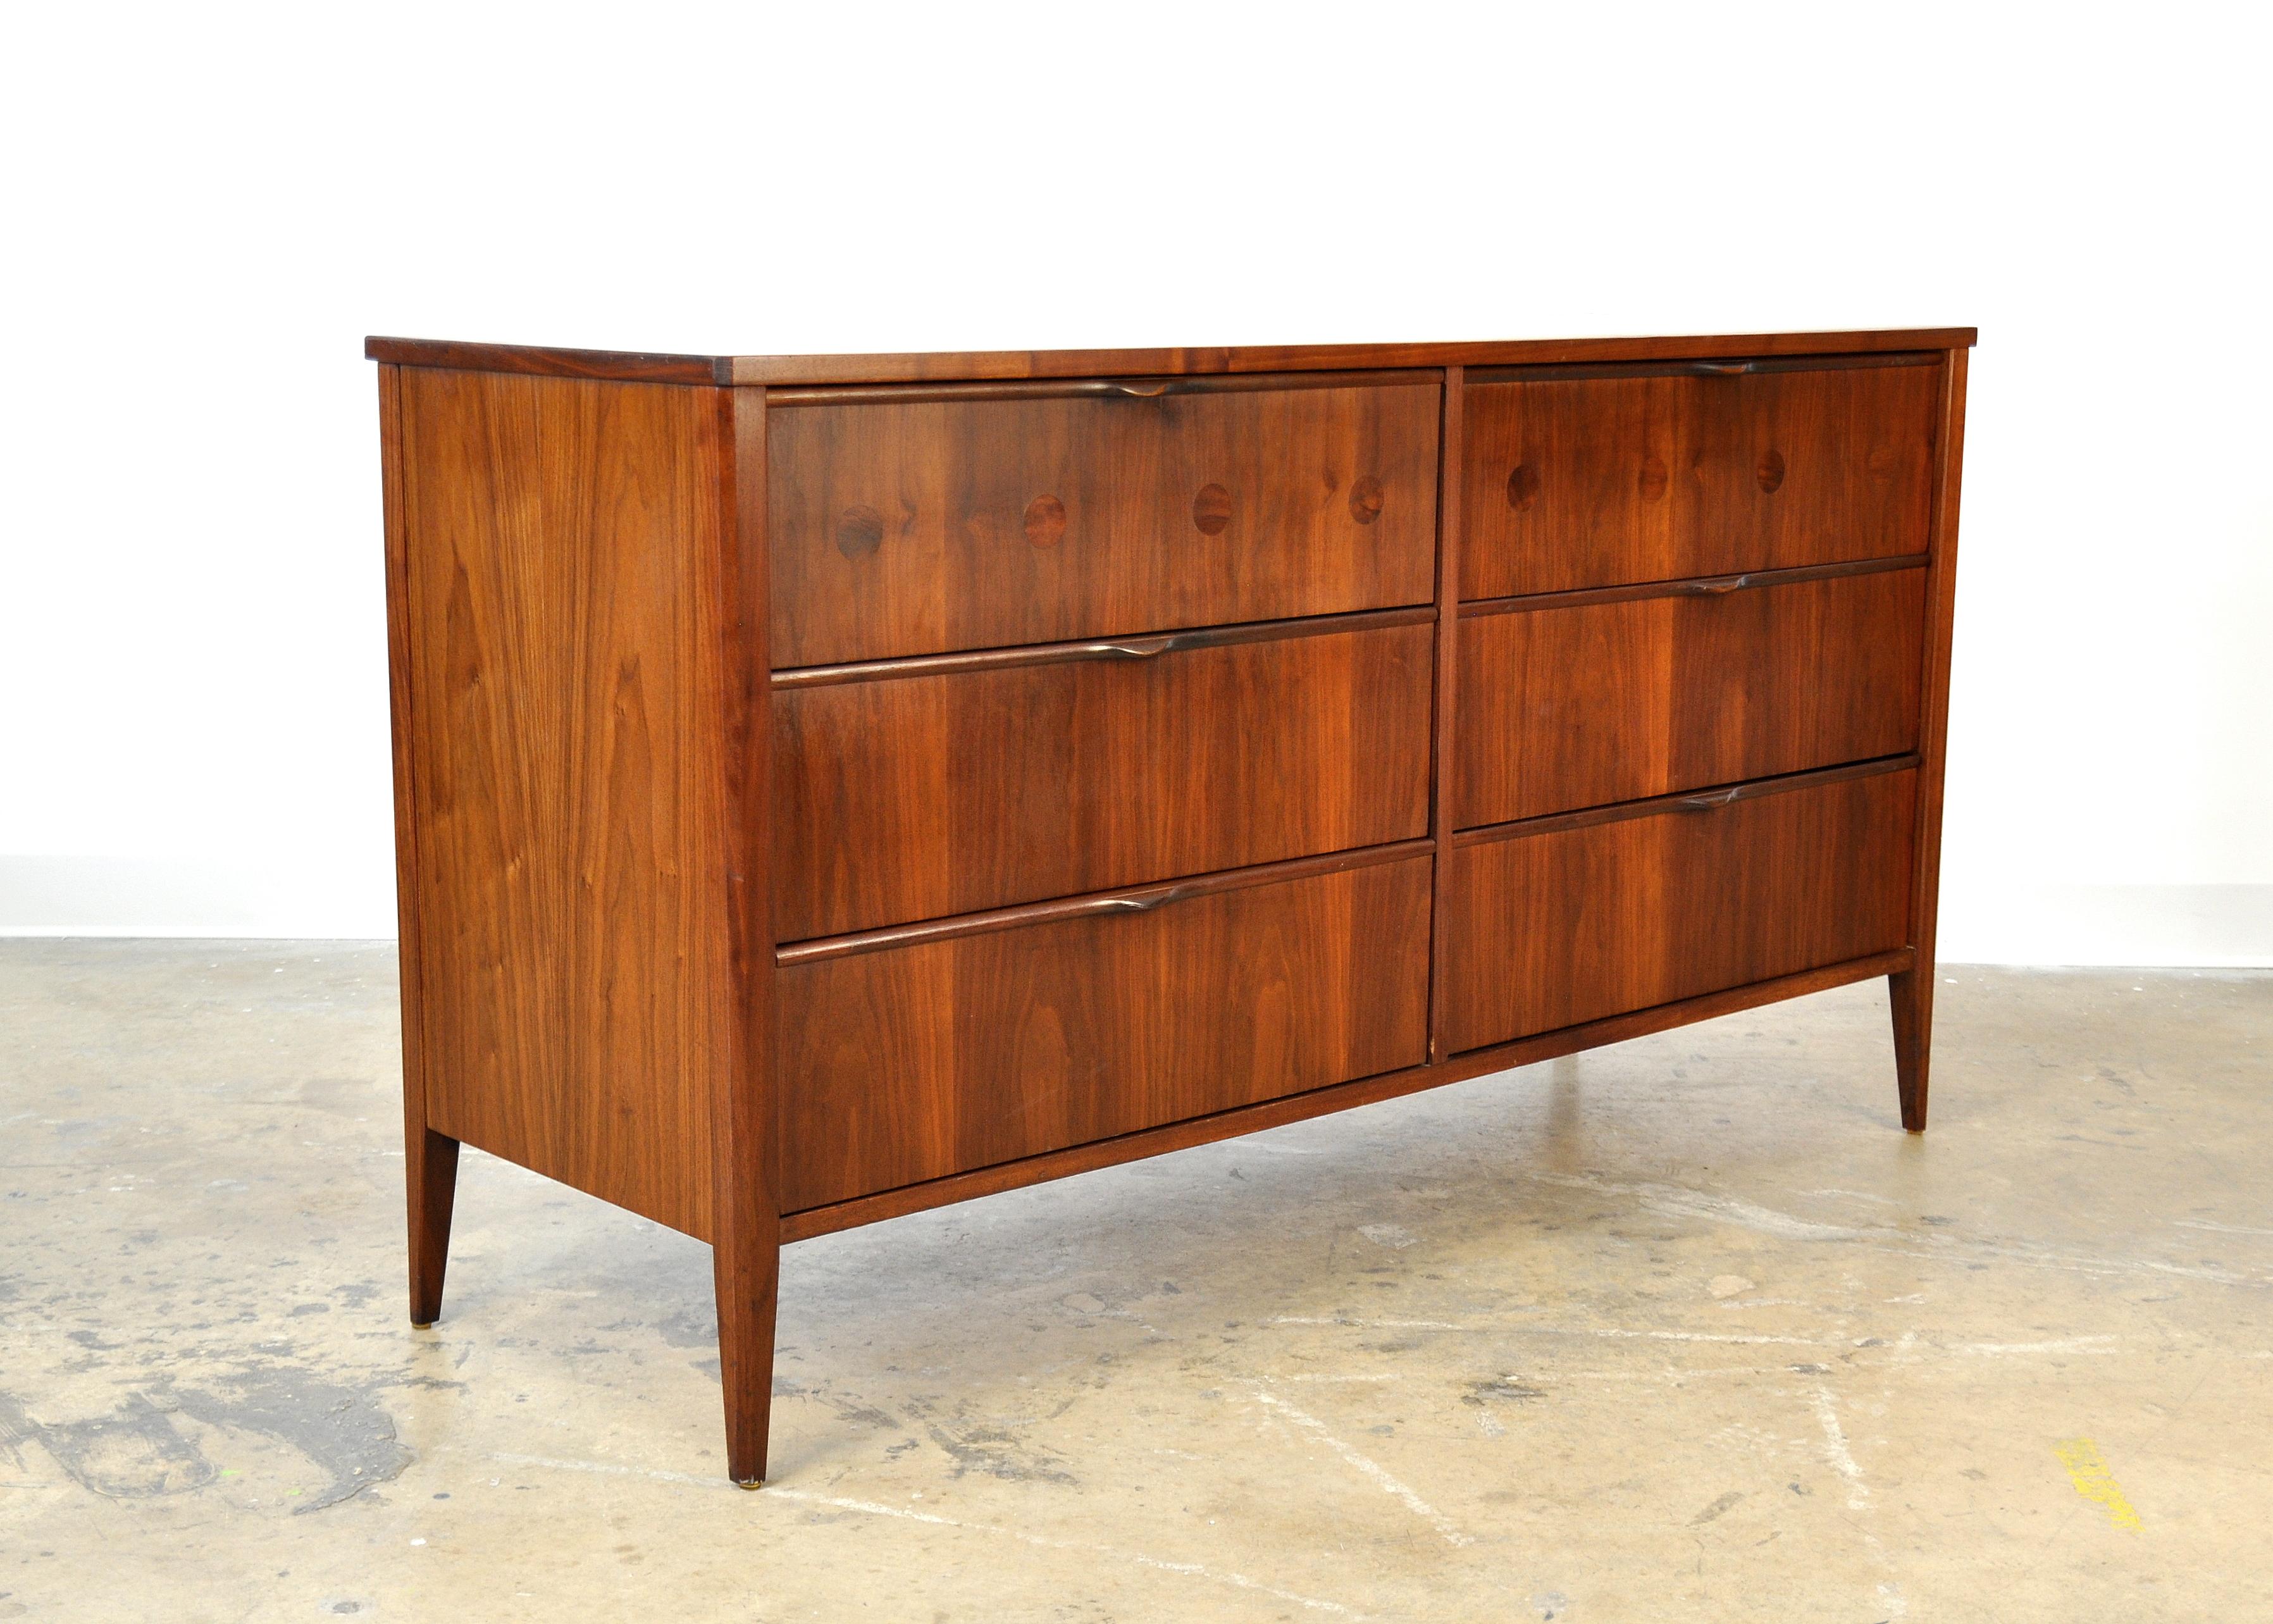 A gorgeous Mid-Century Modern double dresser with rosewood inlay manufactured by Foster-McDavid, dating from the 1950s. The commode features six drawers with Jen Risom style sculpted wood pulls, the top two have inlaid rosewood disks on the drawer